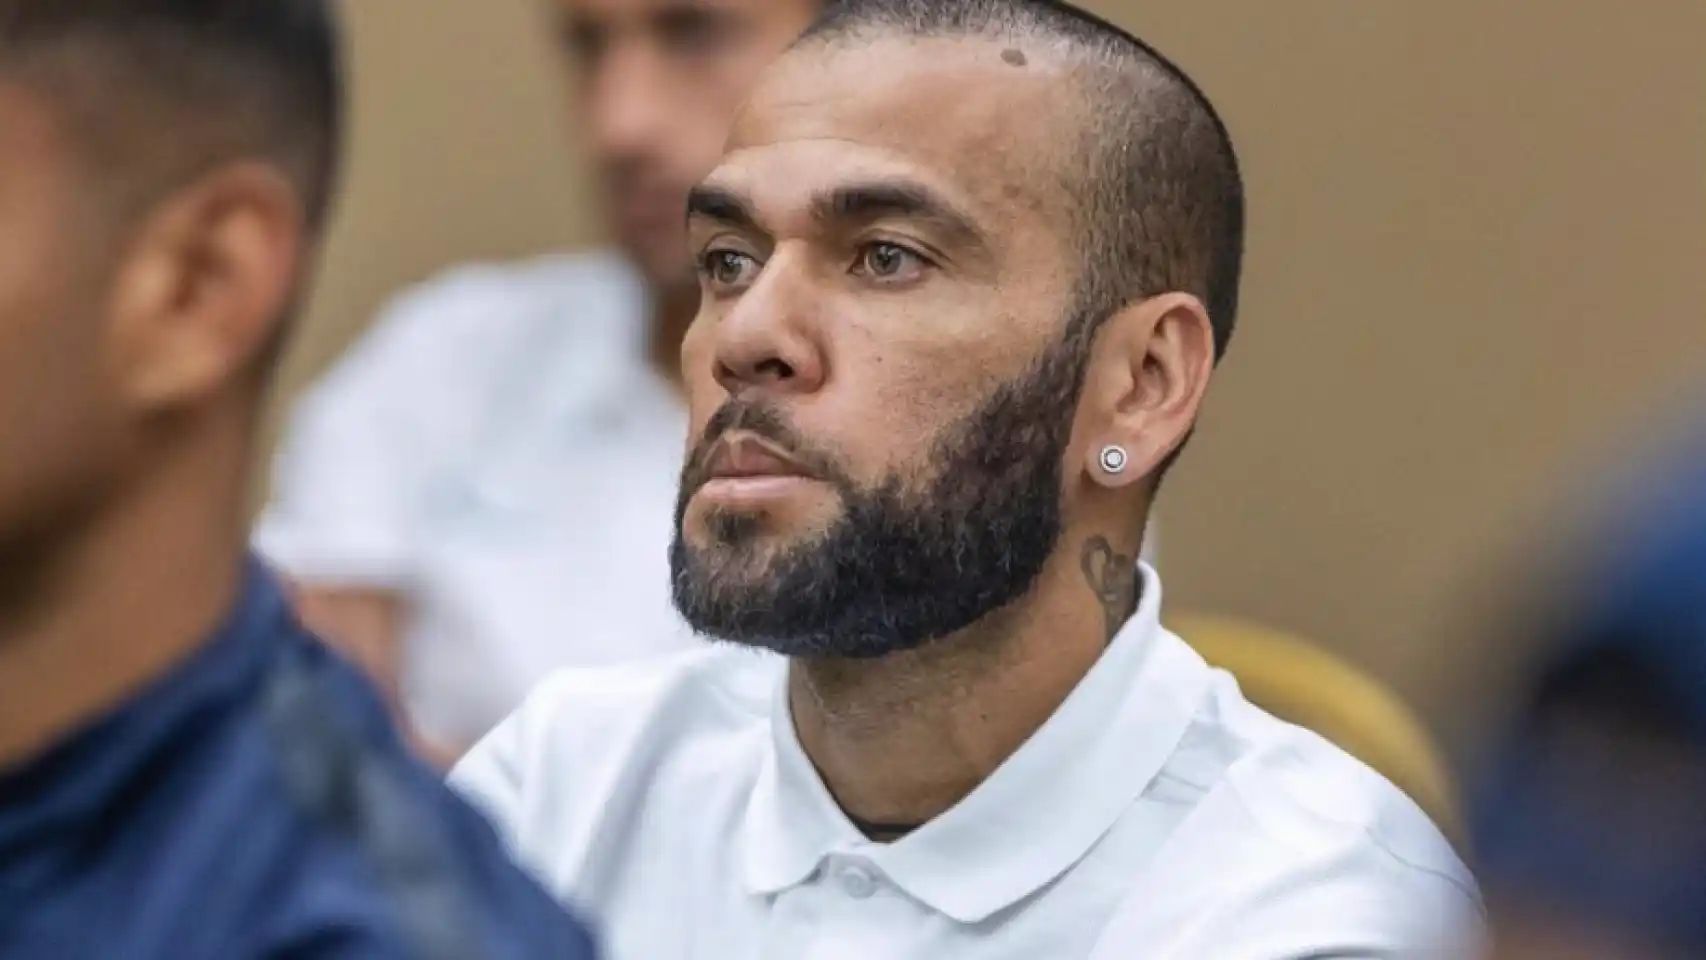 Revealed: The source that helped Dani Alves to pay €1m bail amount